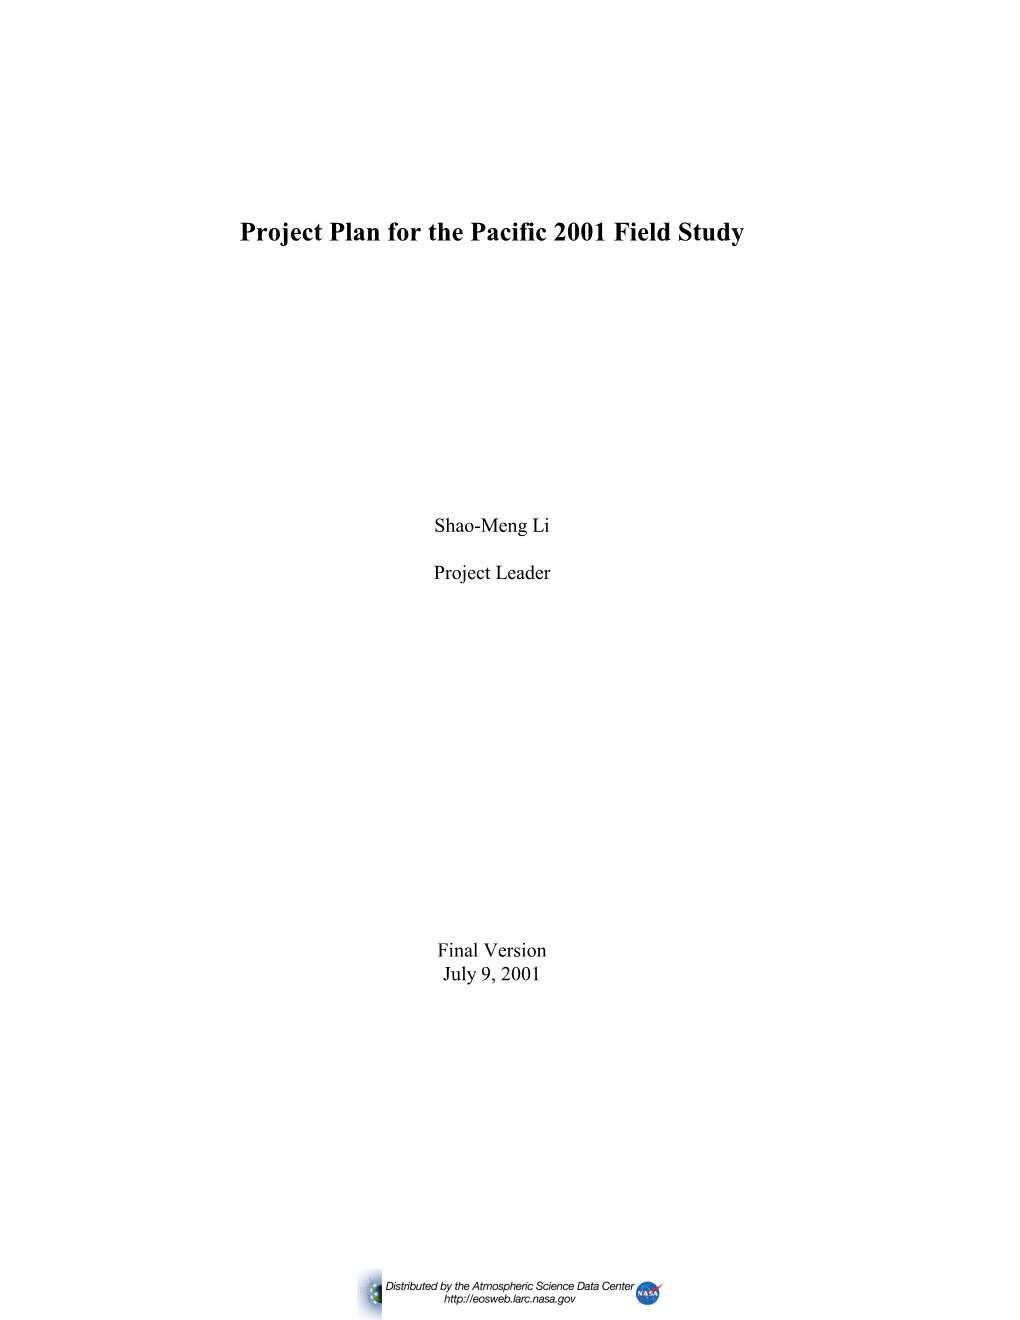 Pacific 2001 Project Plan